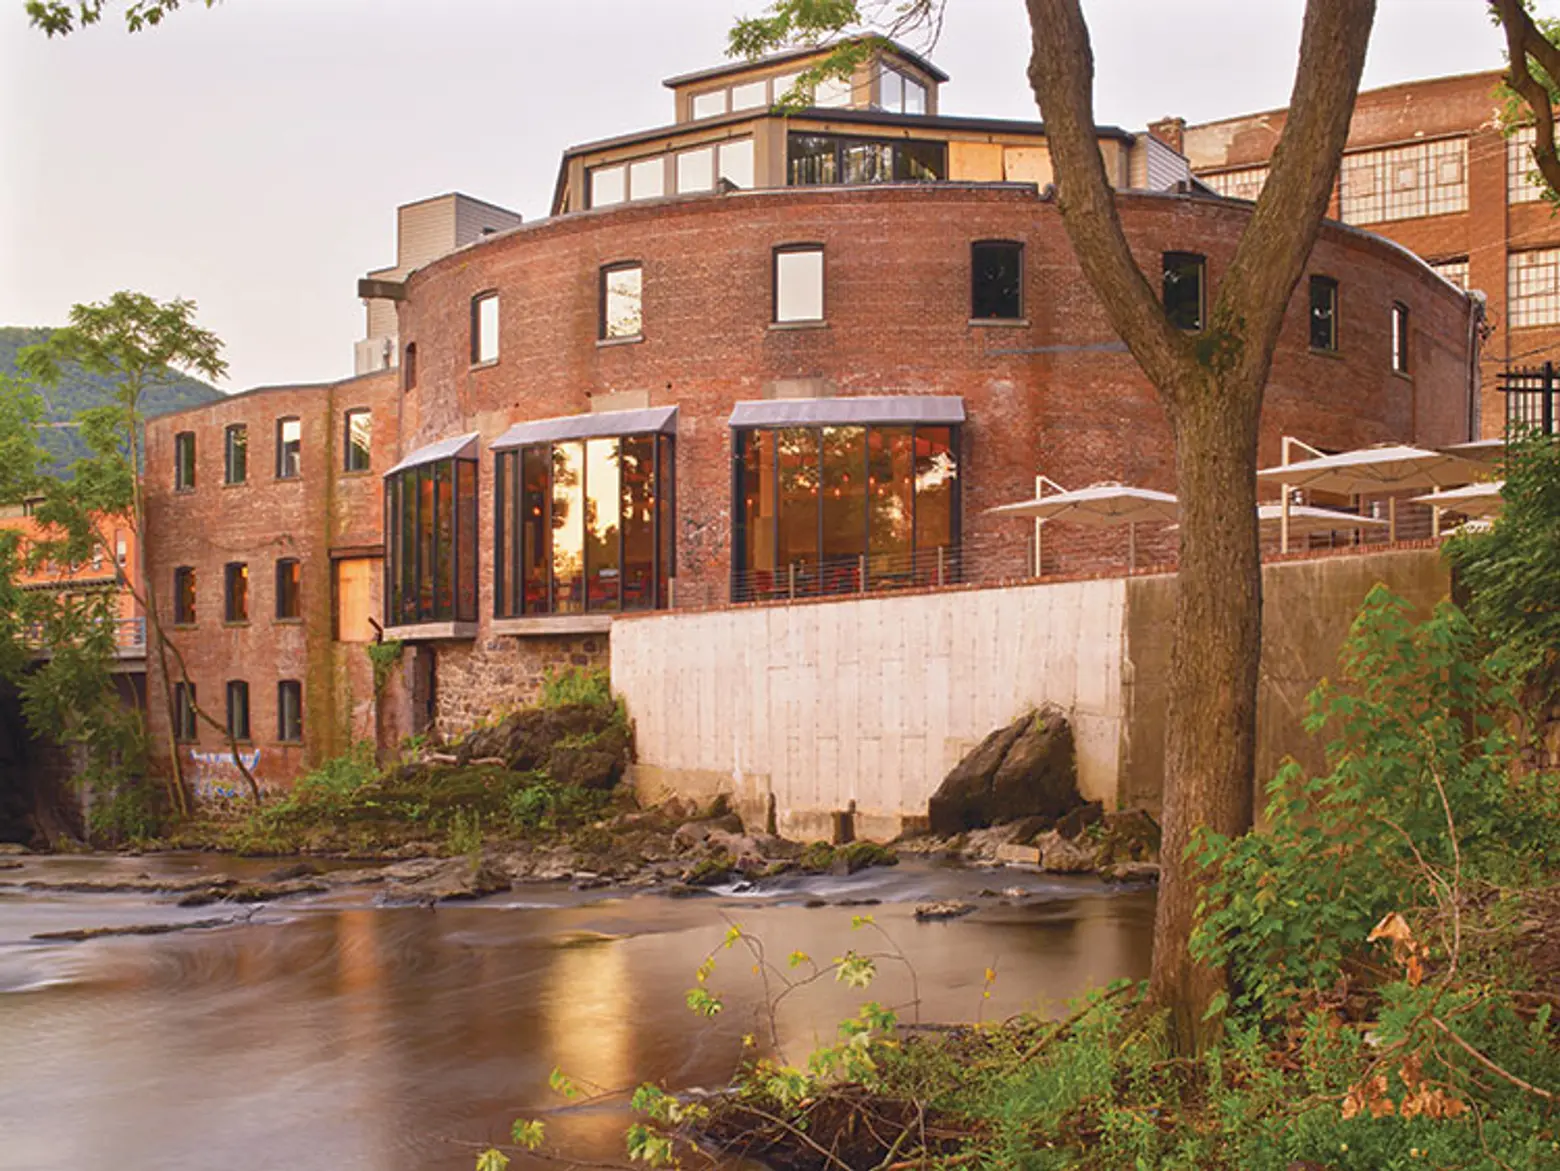 The Roundhouse at Beacon Falls is a Former Industrial Site Turned Locally Designed Getaway